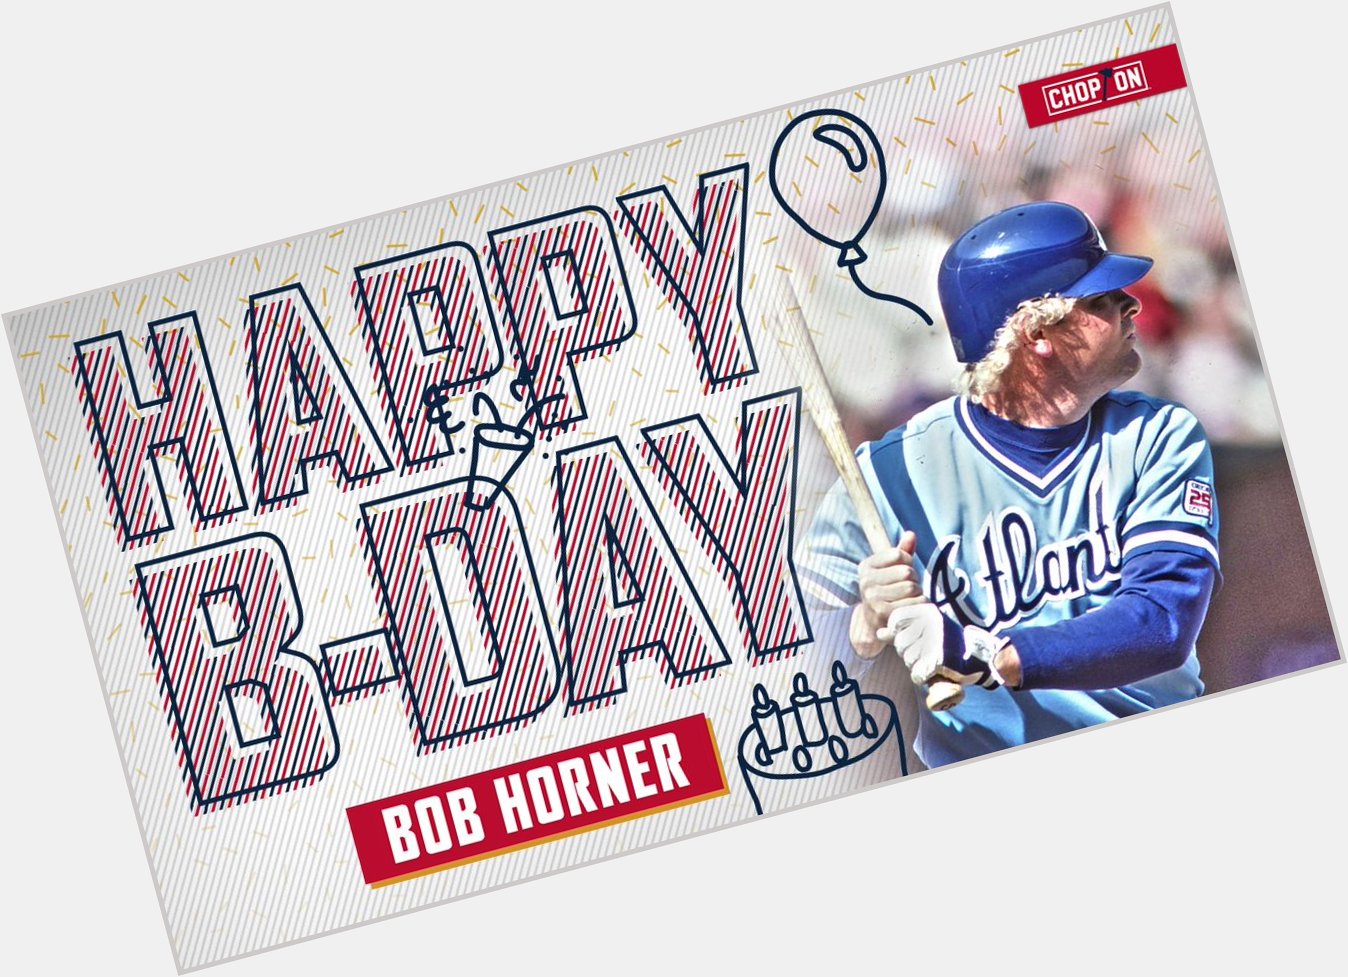 Happy Birthday to legend and 1978 NL Rookie of the Year Bob Horner! 